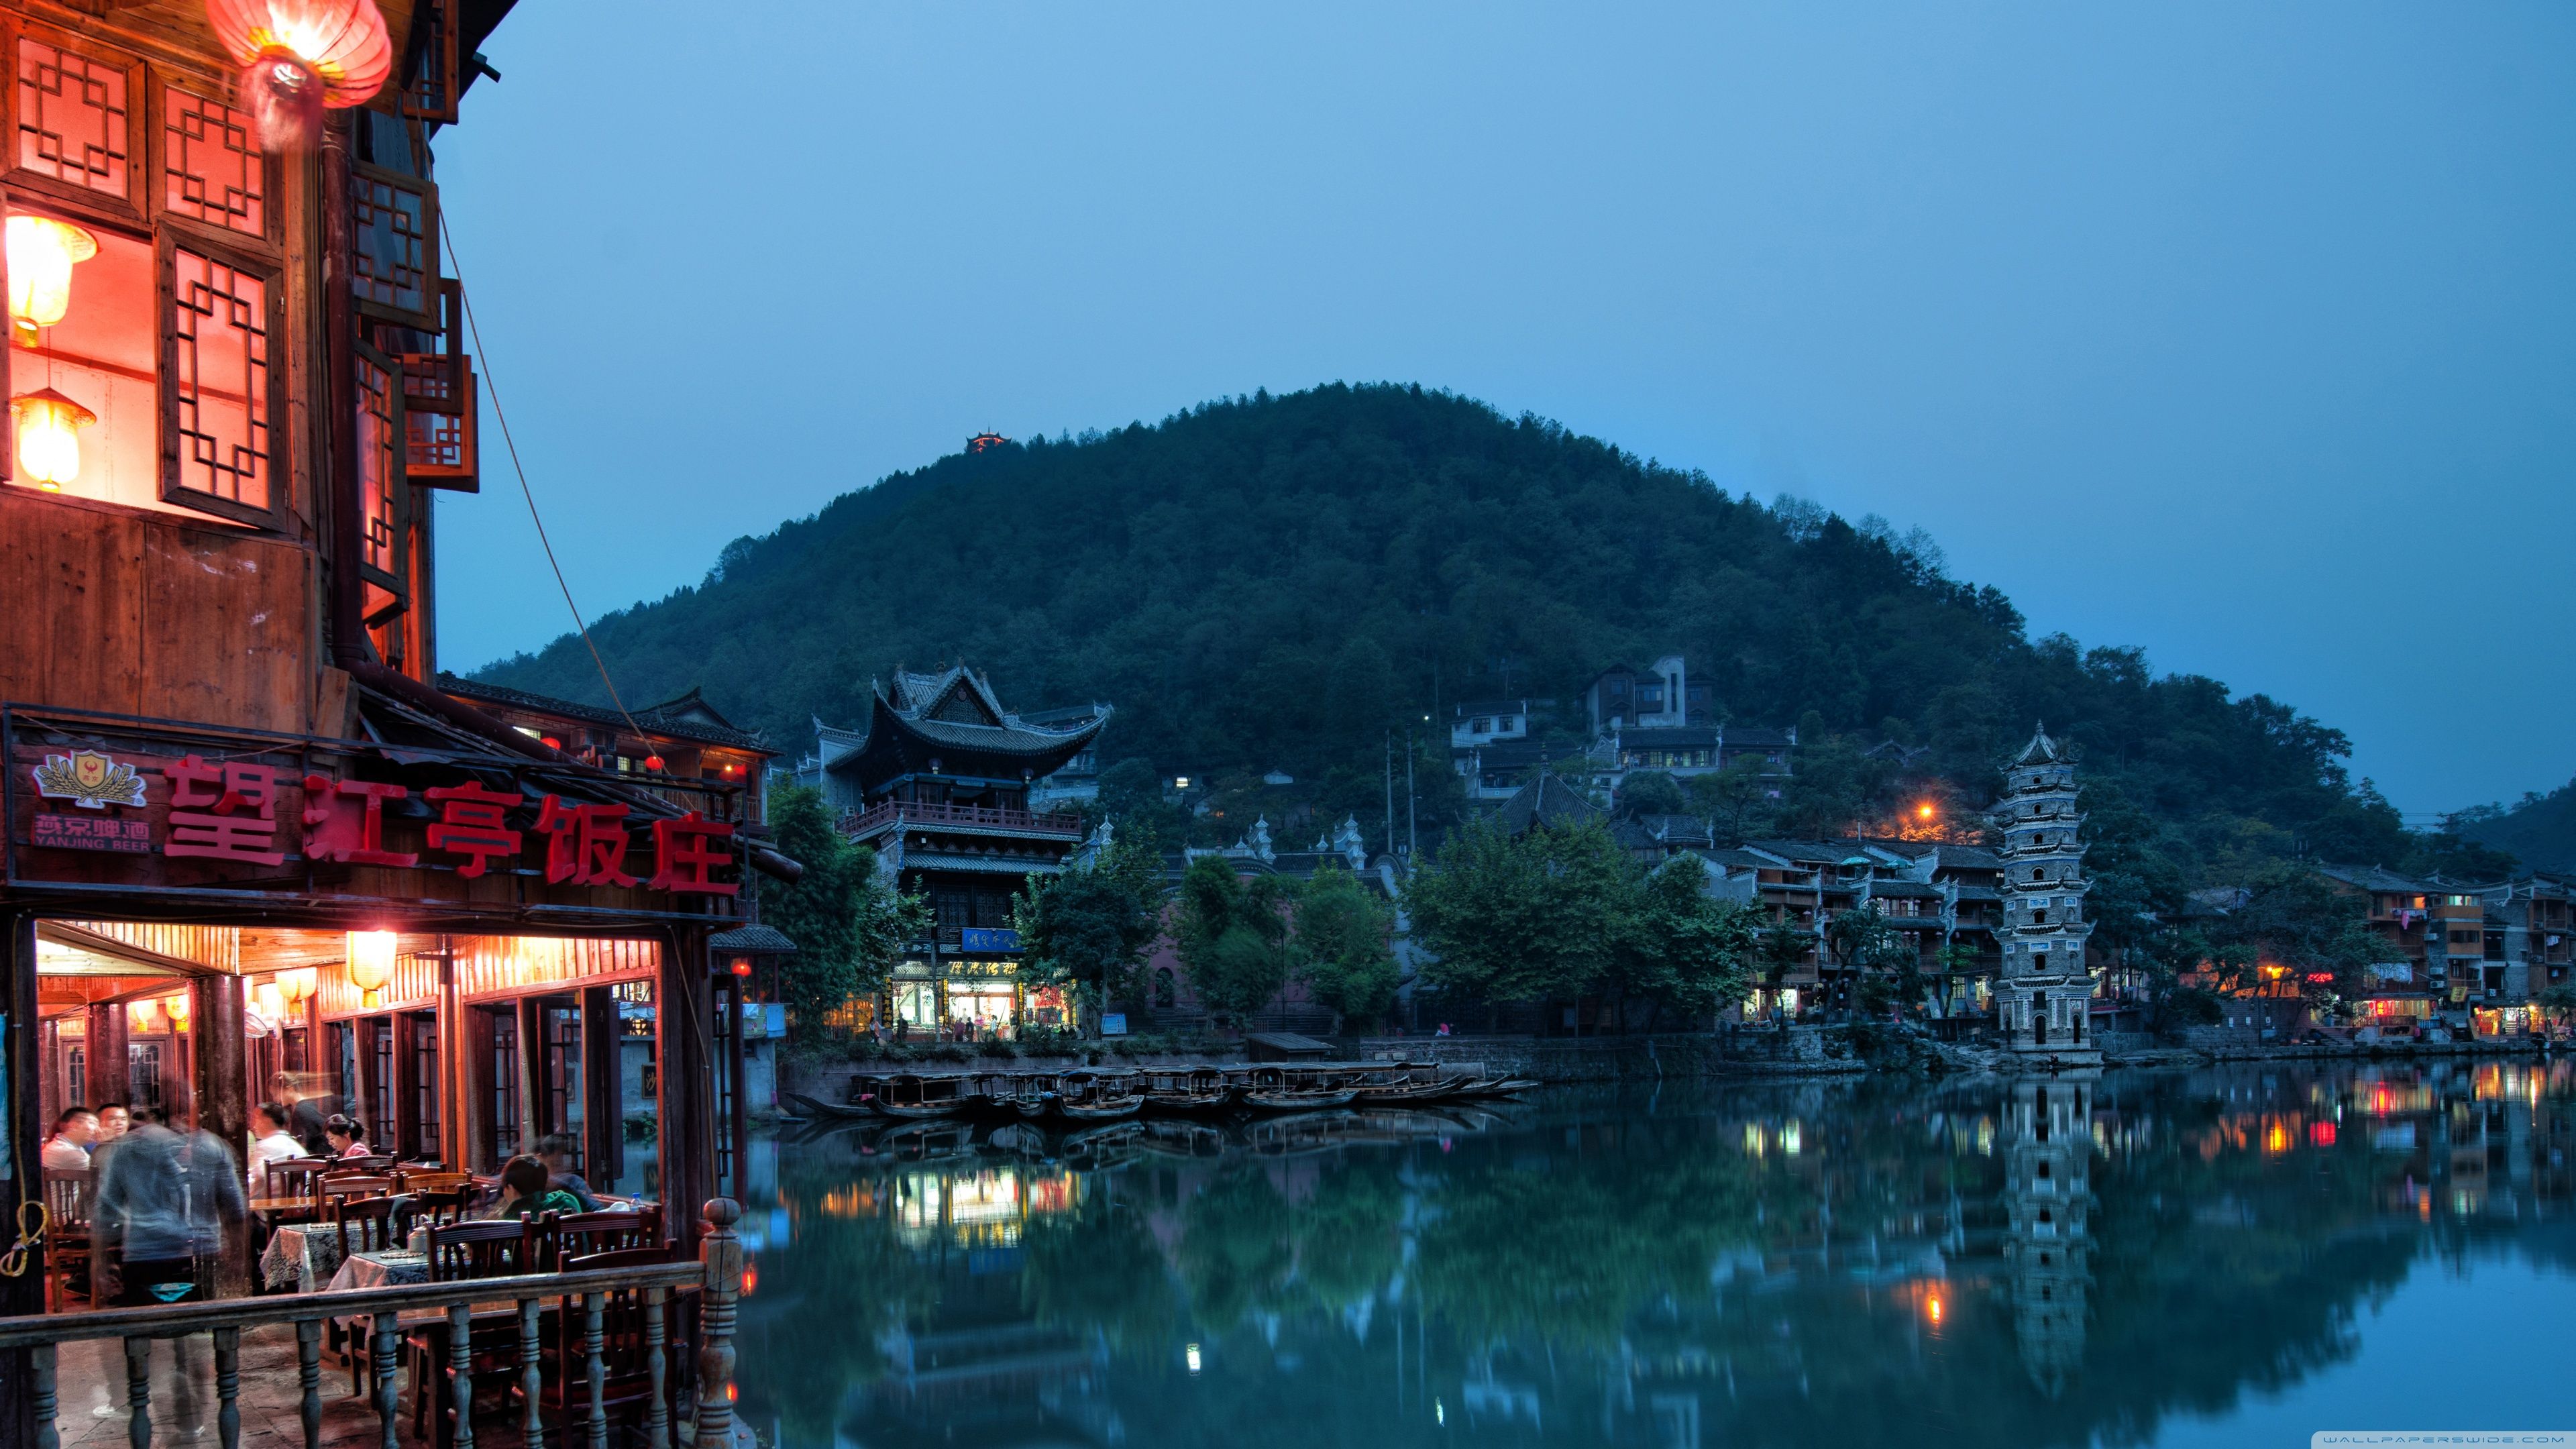 Chinese Town Ultra HD Desktop Background Wallpaper for: Multi Display, Dual Monitor, Tablet